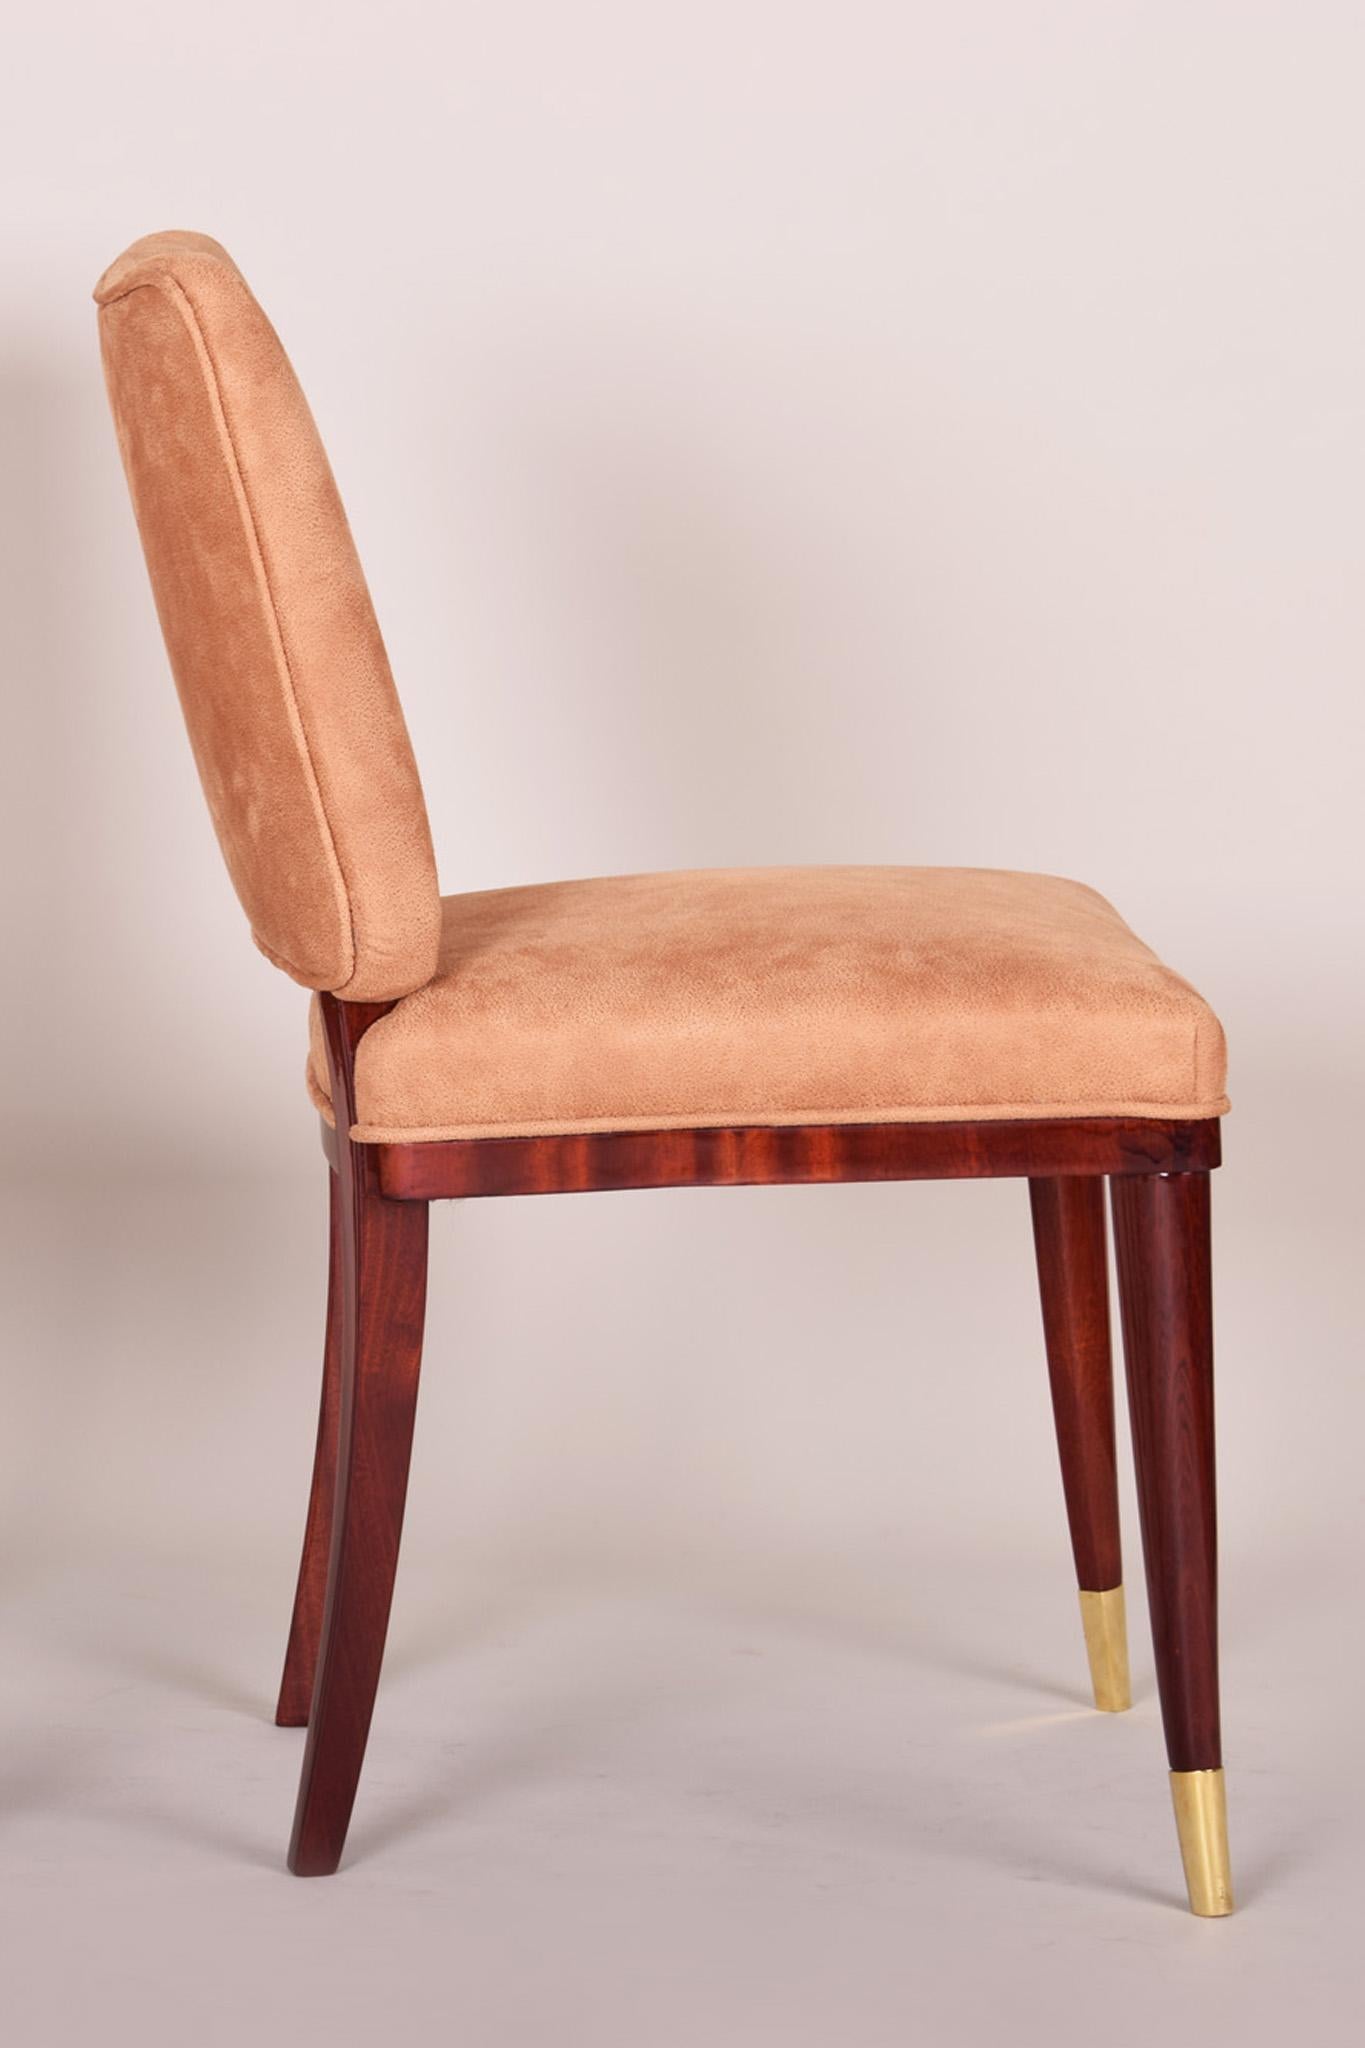 Restored Beige French Art Deco Chair, Designed by Jules Leleu, 1920-1929 For Sale 6